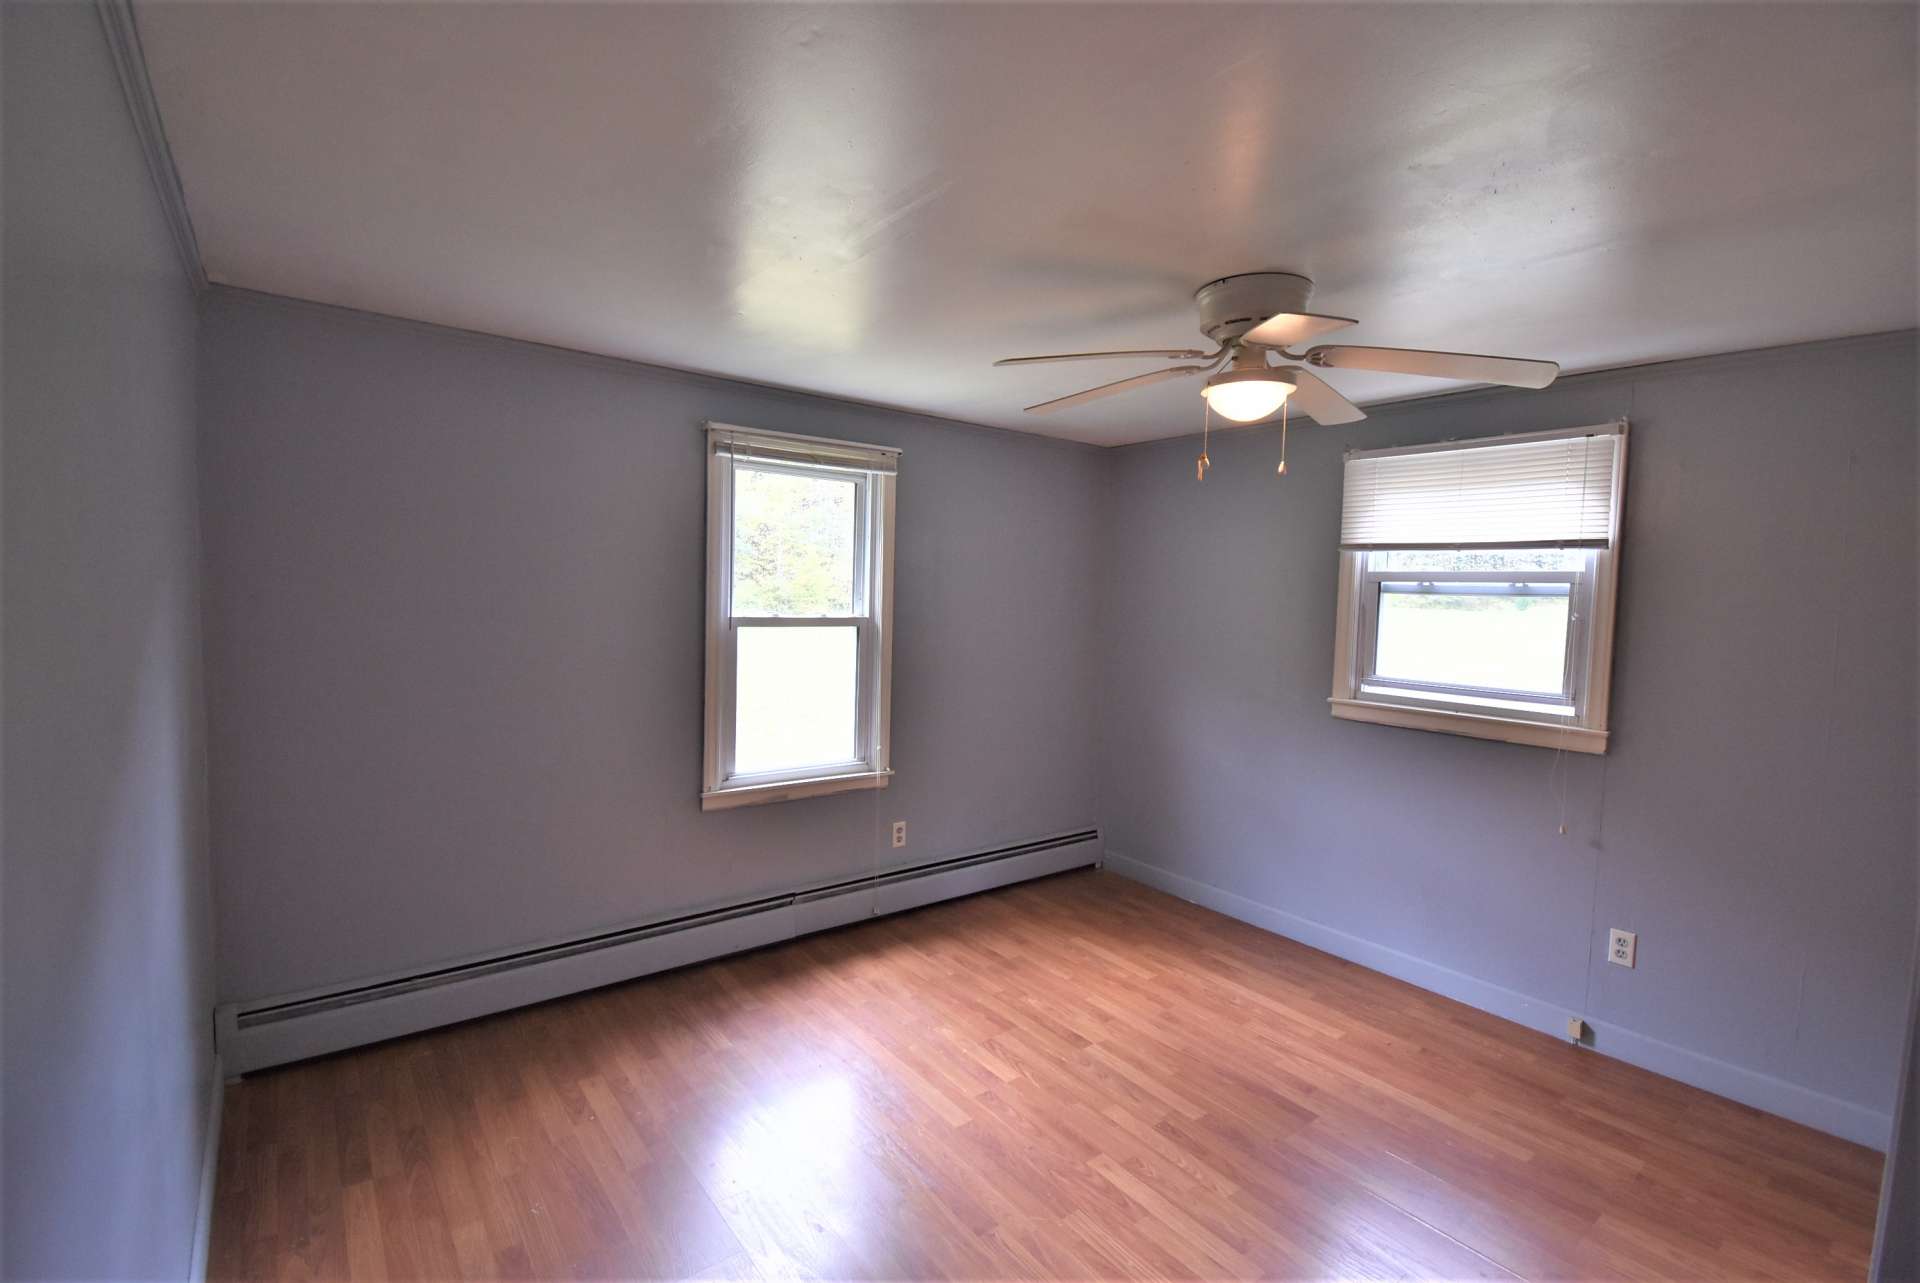 All of the bedrooms have wood flooring and plenty of windows for natural light.